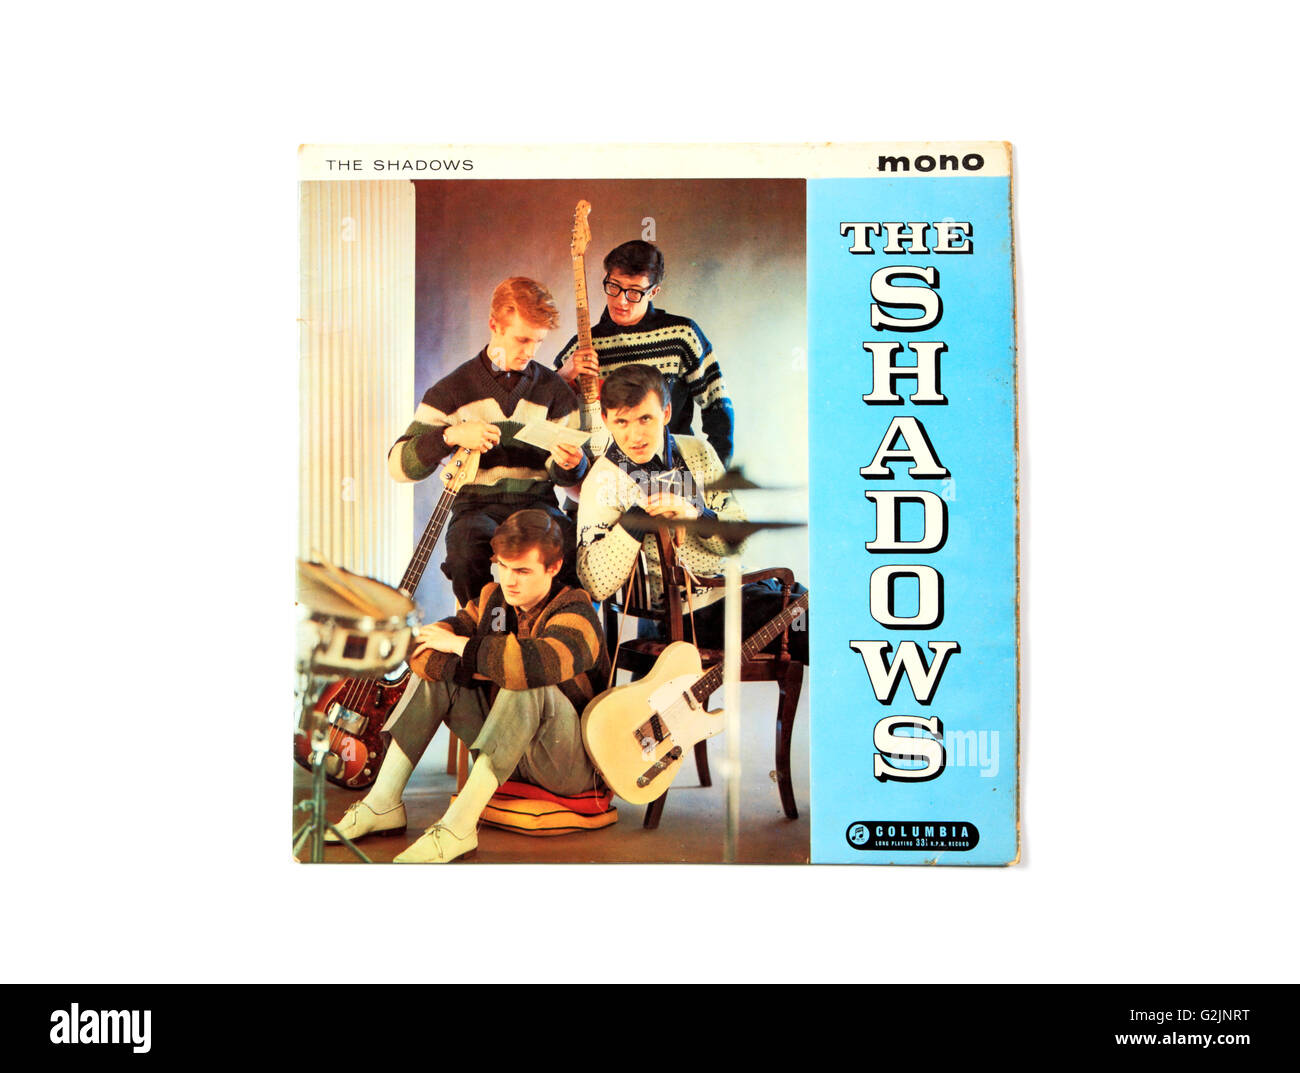 A Shadows long playing record album cover entitled "The Shadows". Stock Photo